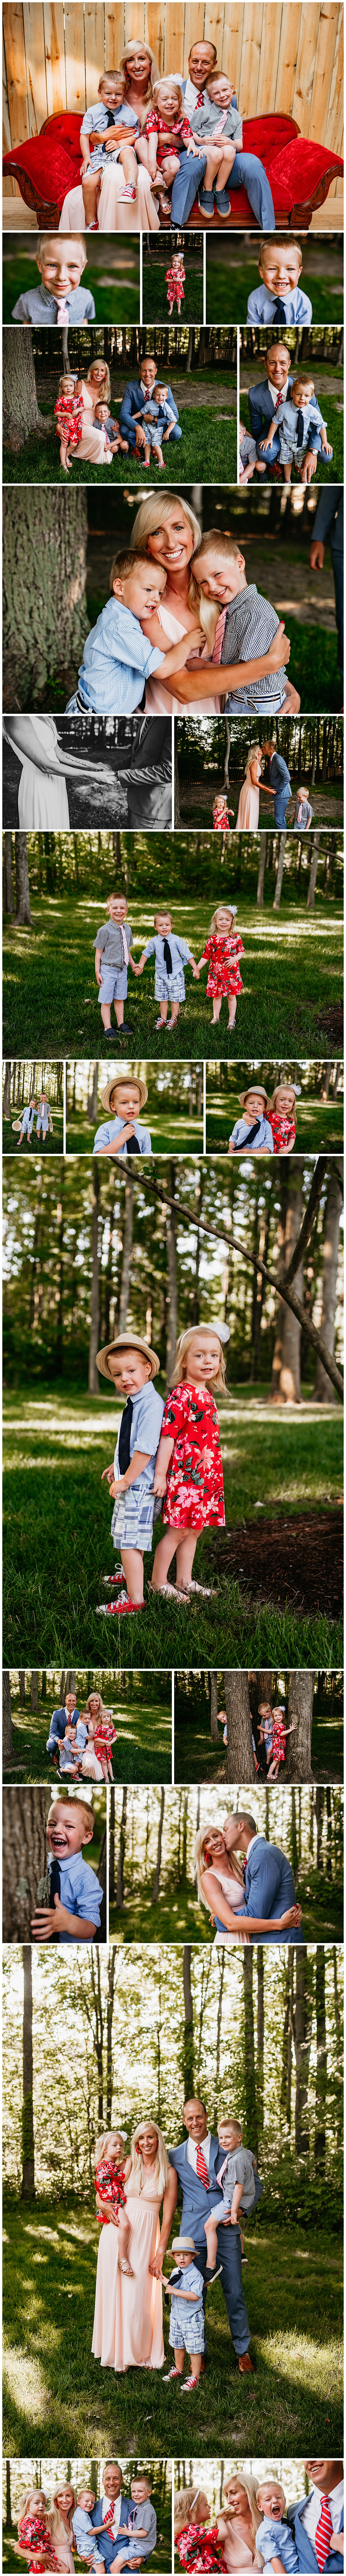 Milford Ohio morning family session